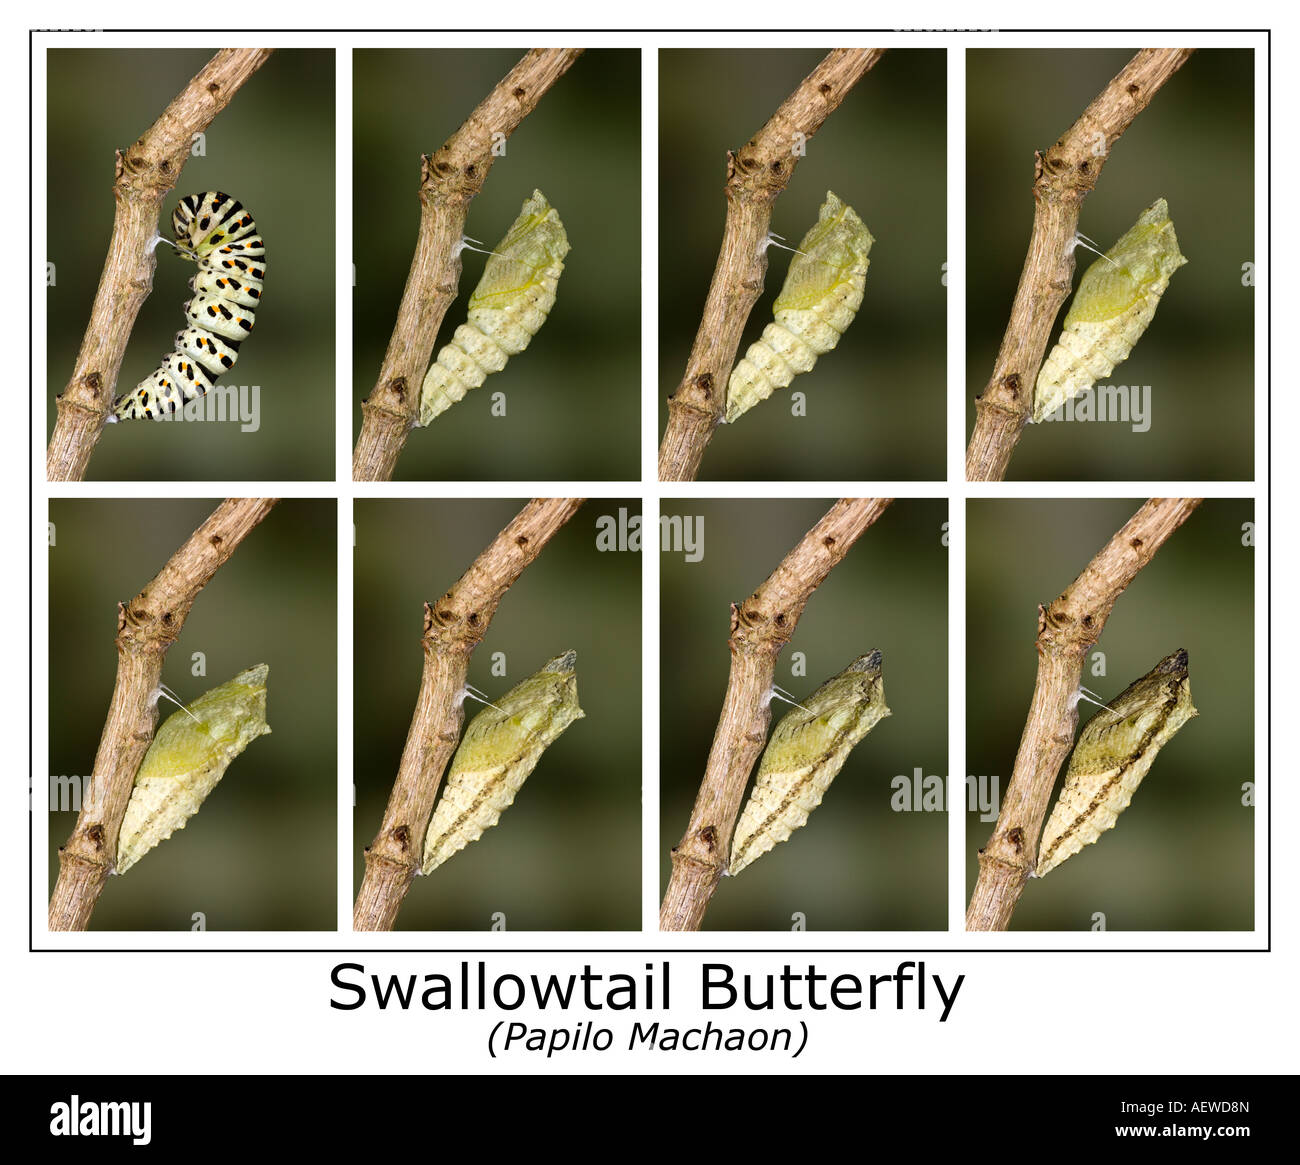 Swallowtail butterfly Papilio machaon chrysalis forming on stem full sequence Stock Photo